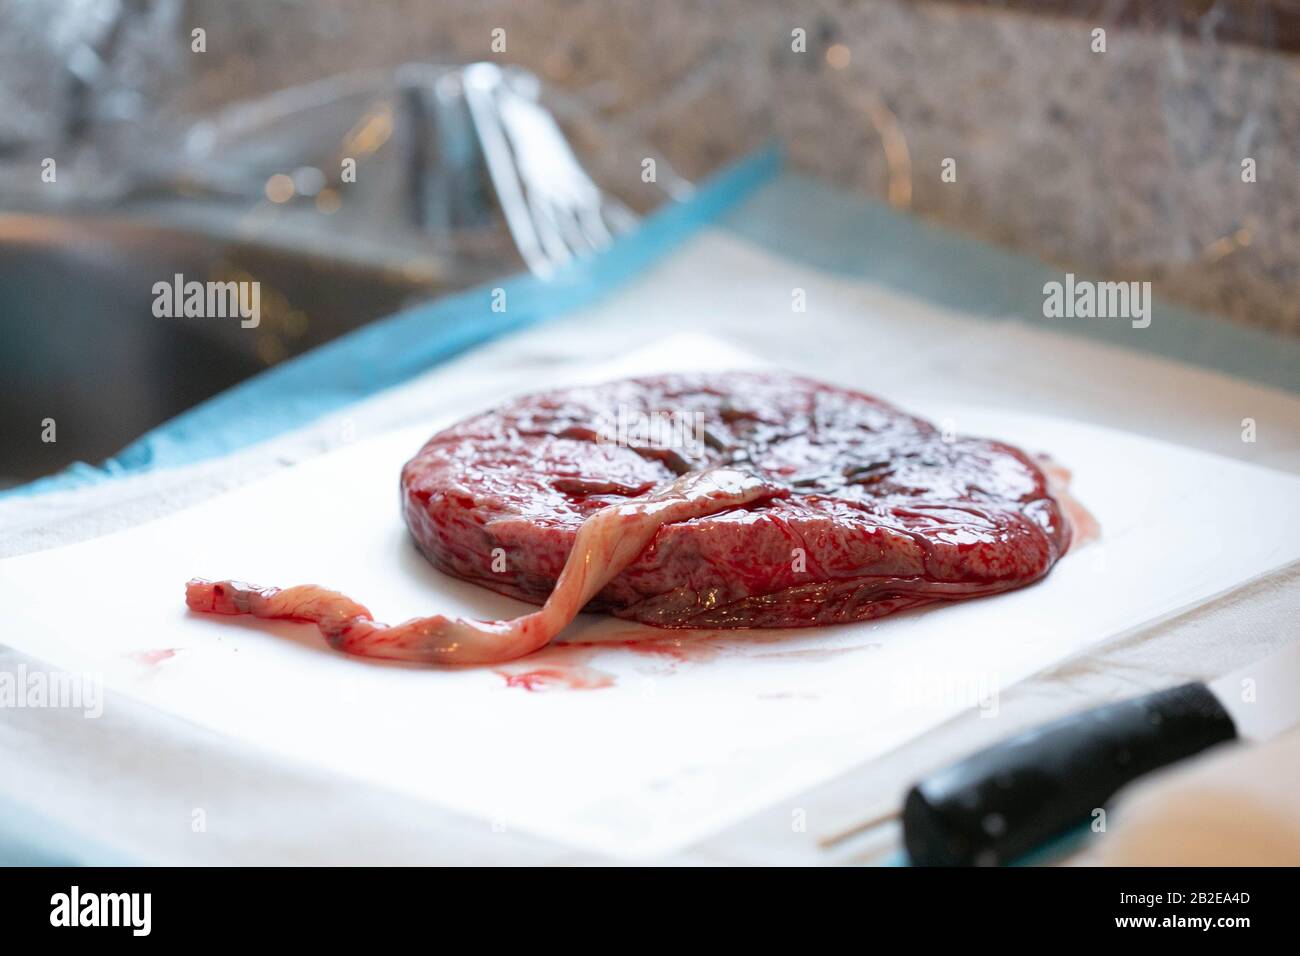 Human placenta lying on white pad on countertop visible umbilical cord Stock Photo